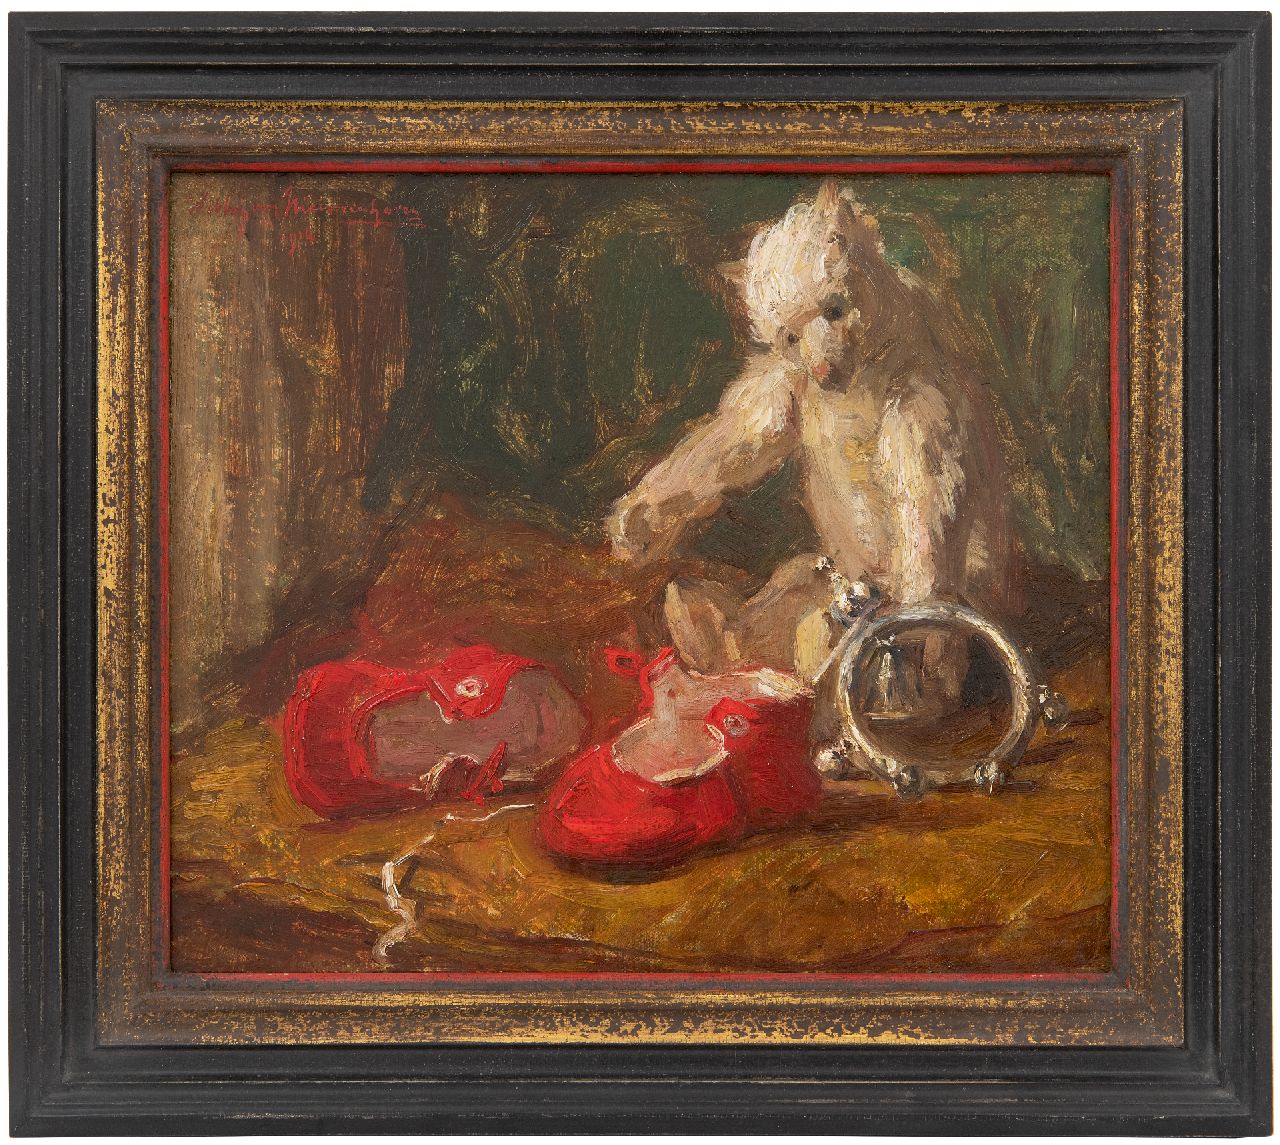 Nieuwenhoven W. van | Willem van Nieuwenhoven | Paintings offered for sale | Still life with bear and red children's shoes, oil on canvas 30.0 x 35.9 cm, signed u.l. and dated 1914